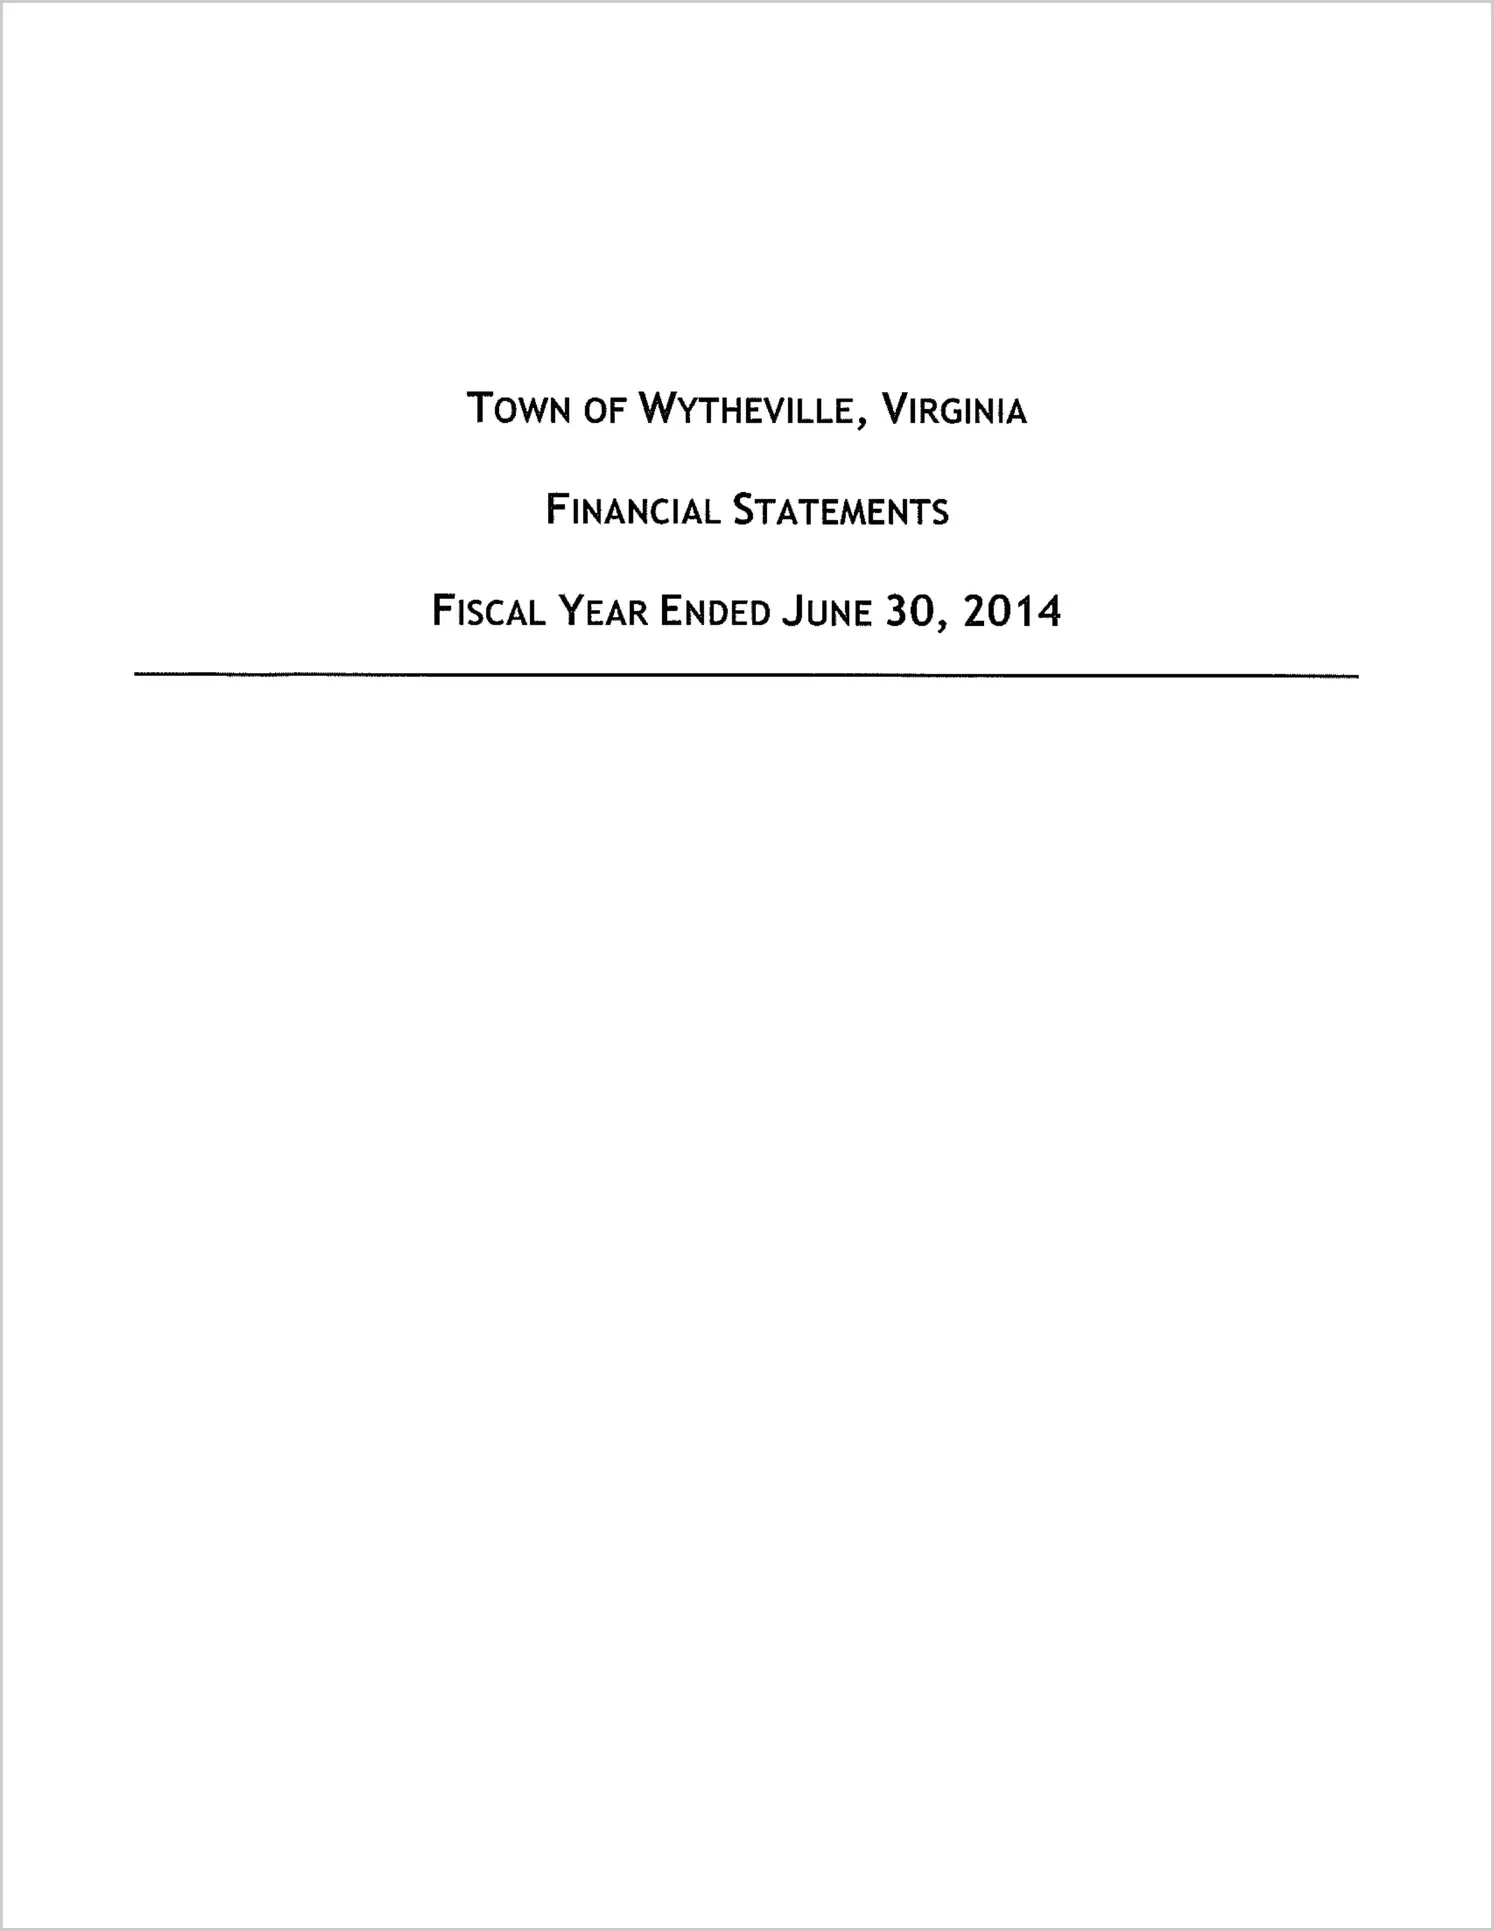 2014 Annual Financial Report for Town of Wytheville